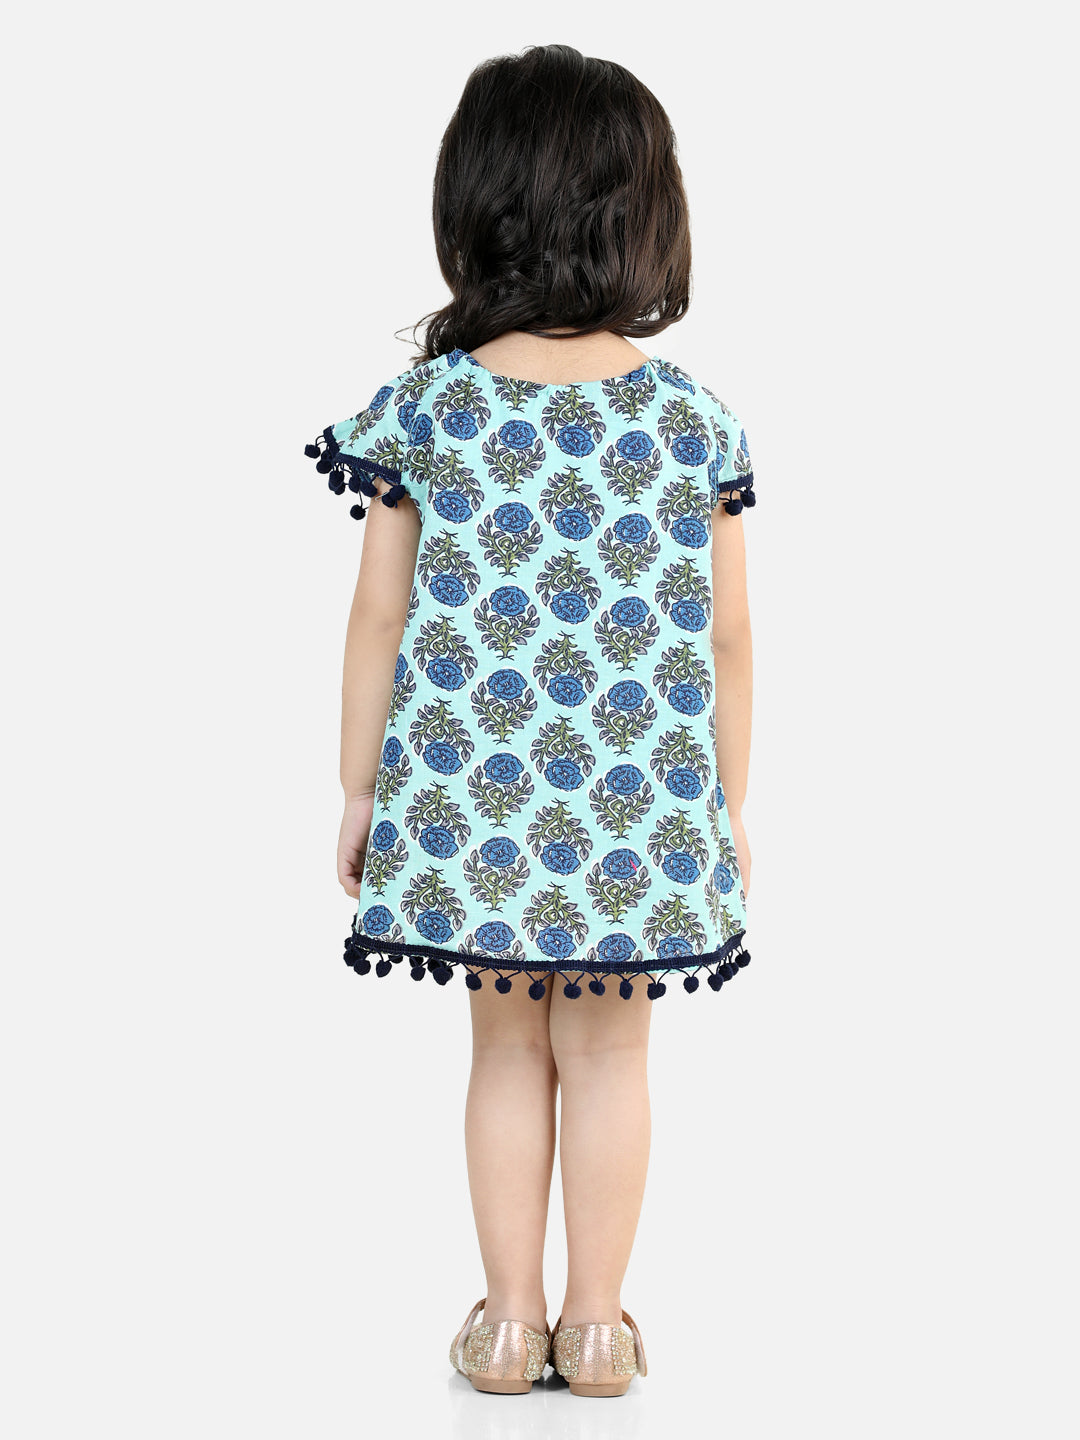 BownBee 100% Cotton Printed with Pompom Jhabla Frock for Girls - Light Blue